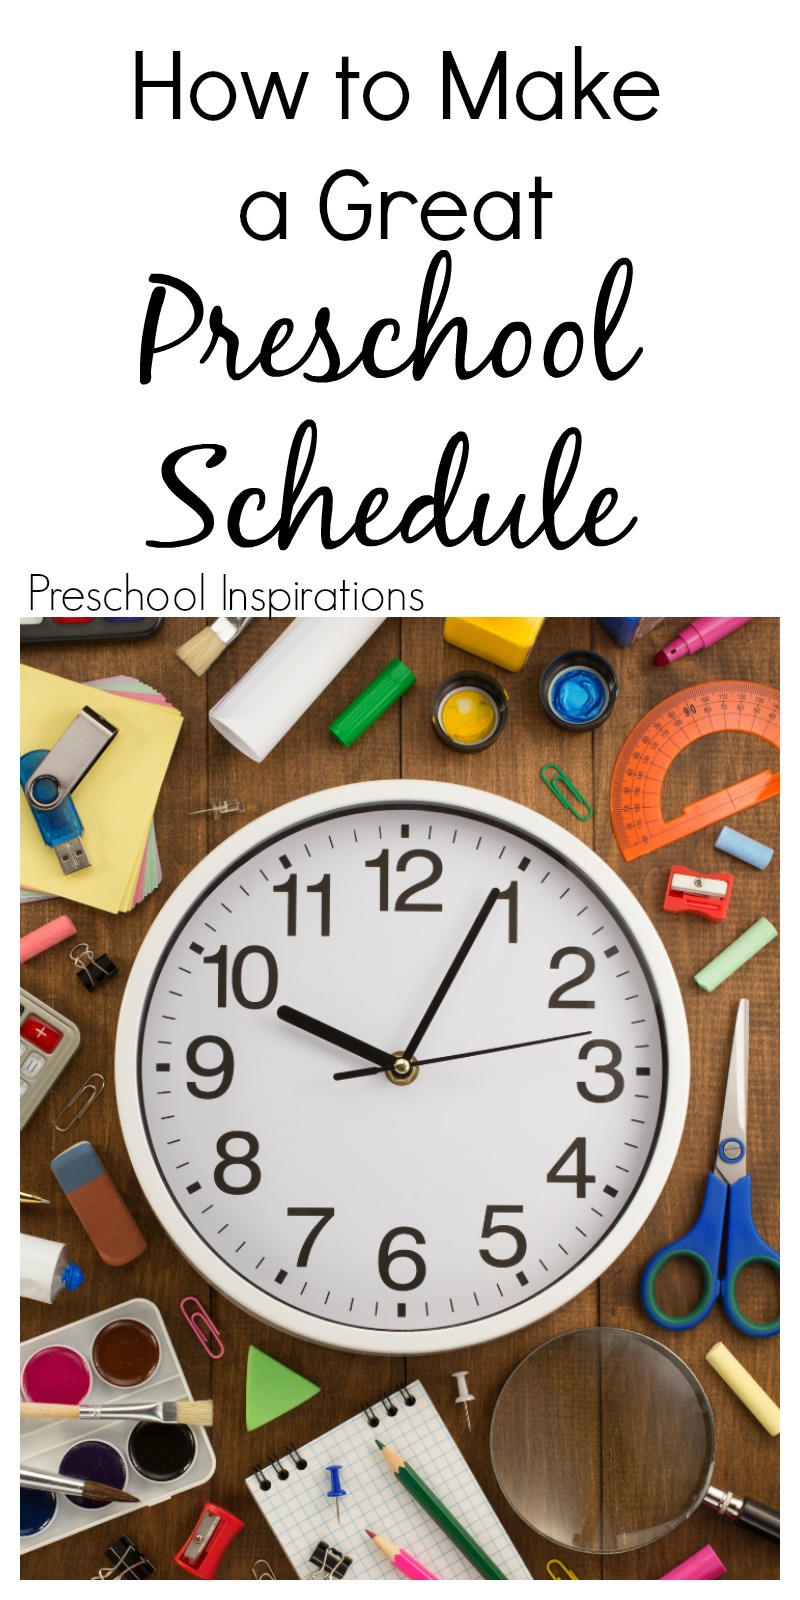 5 must-haves for making a great schedule with preschoolers.